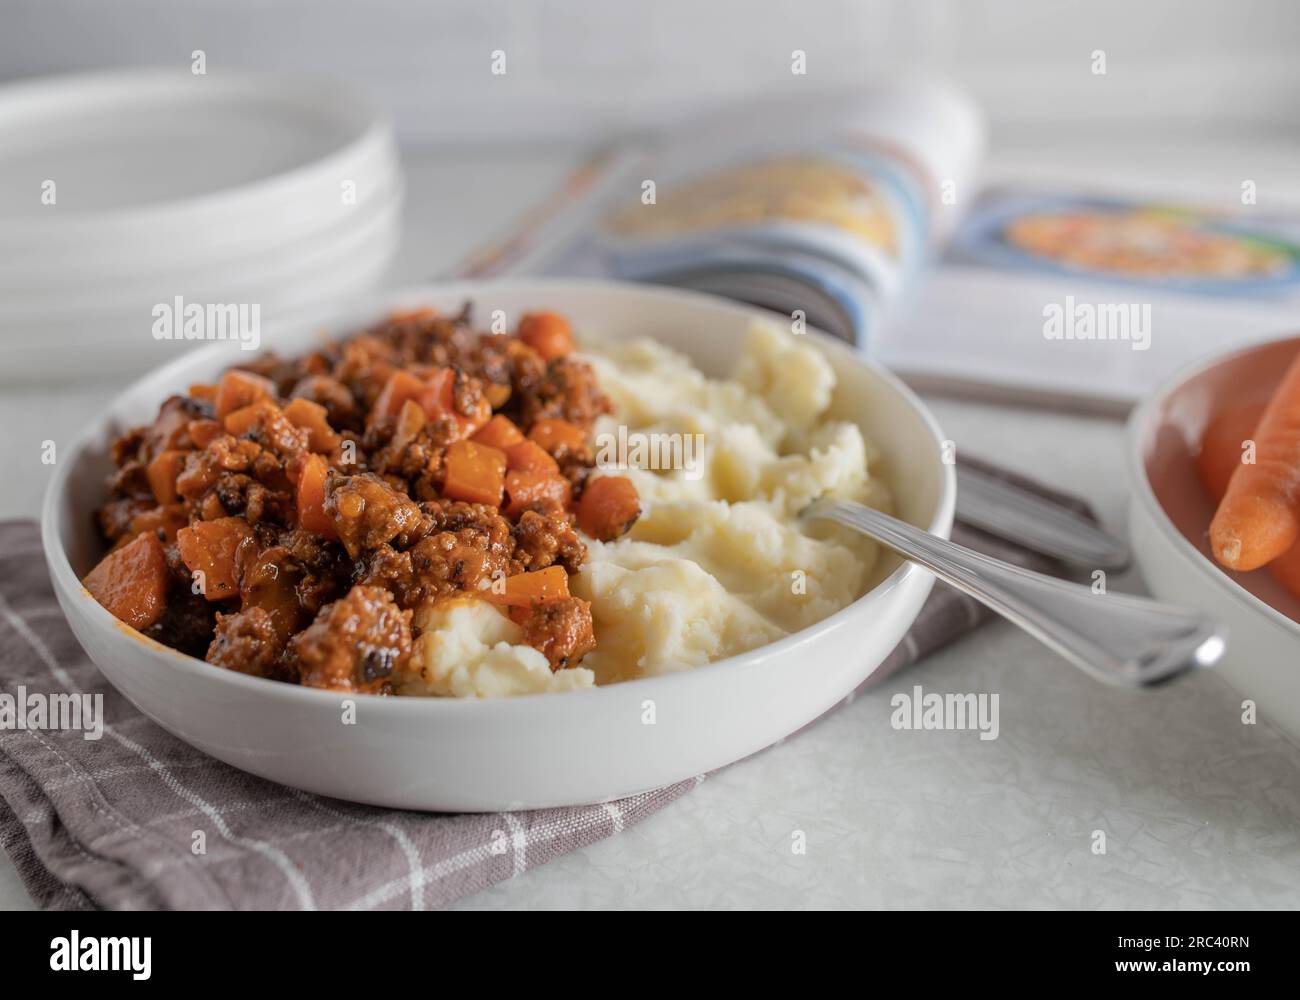 Plate with ground beef, carrots and mashed potatoes on kitchen counter. Home cooked meal Stock Photo